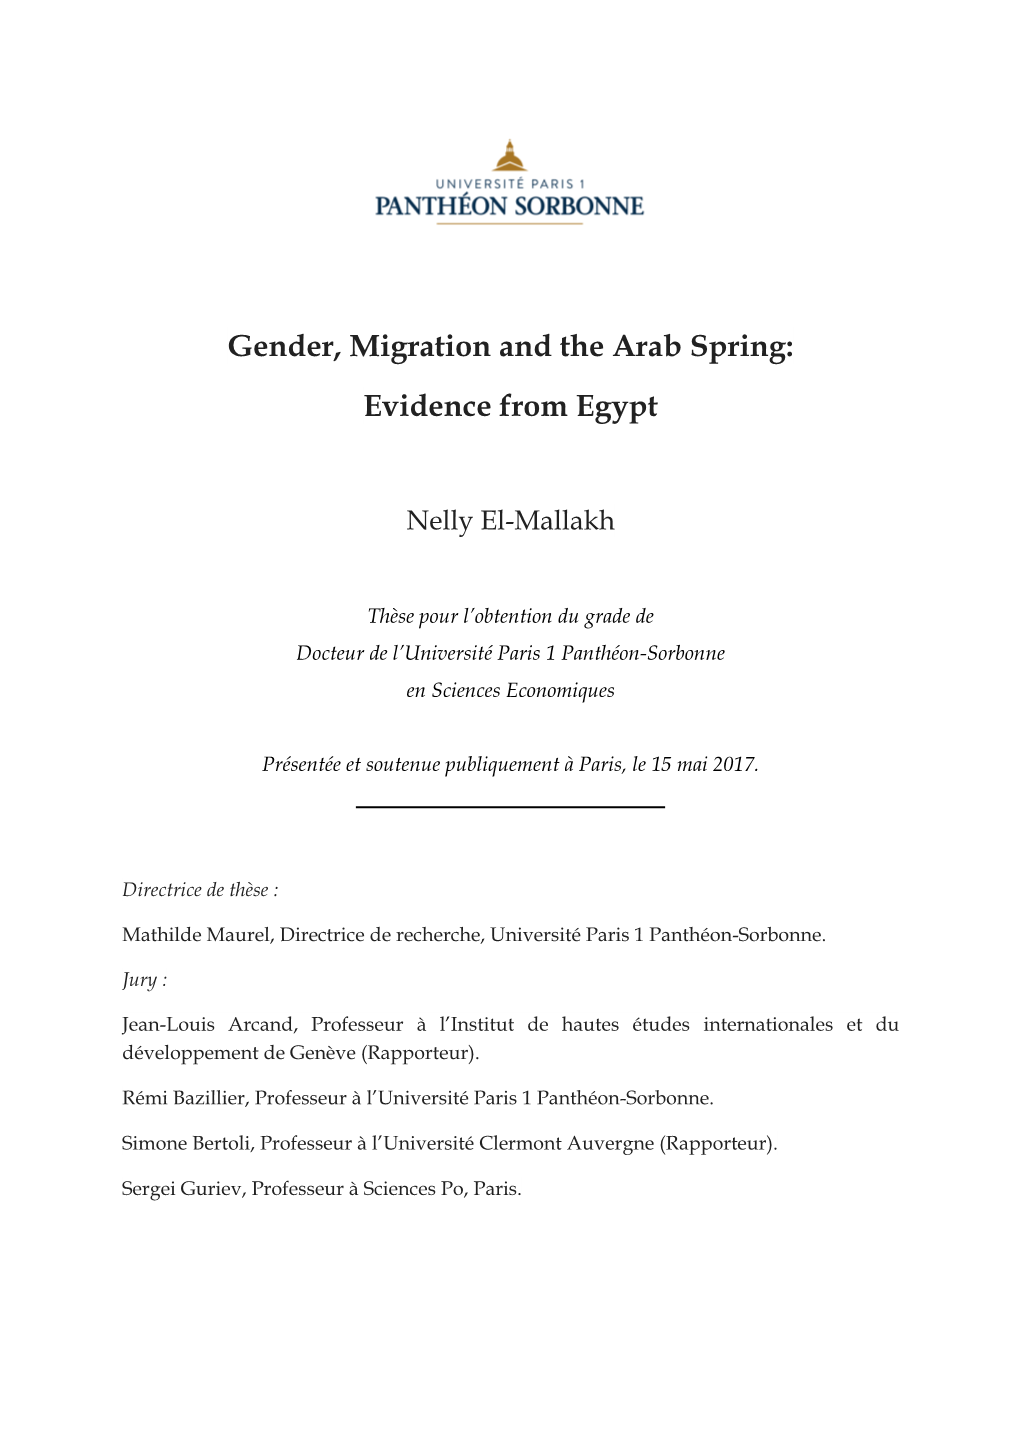 Gender, Migration and the Arab Spring: Evidence from Egypt